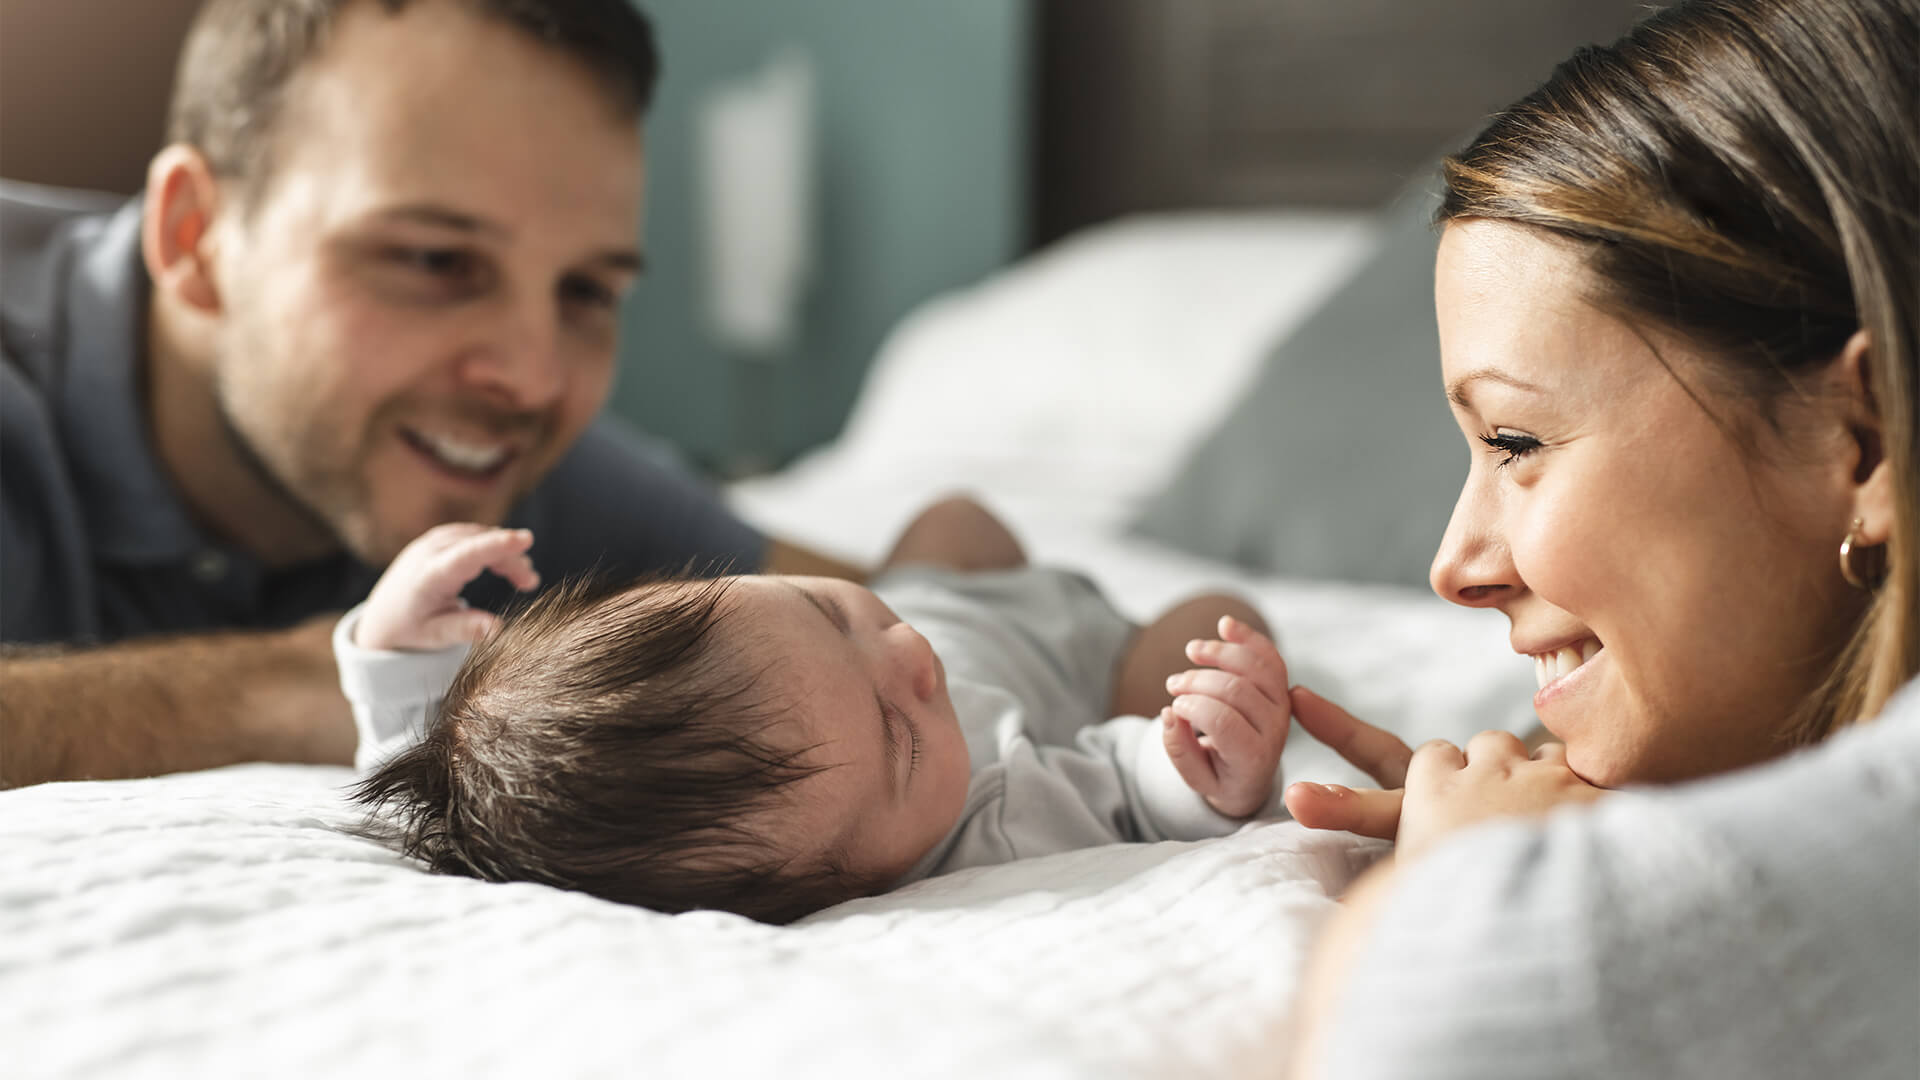 Baby FAQs: The Most Common Concerns for First-Time Parents